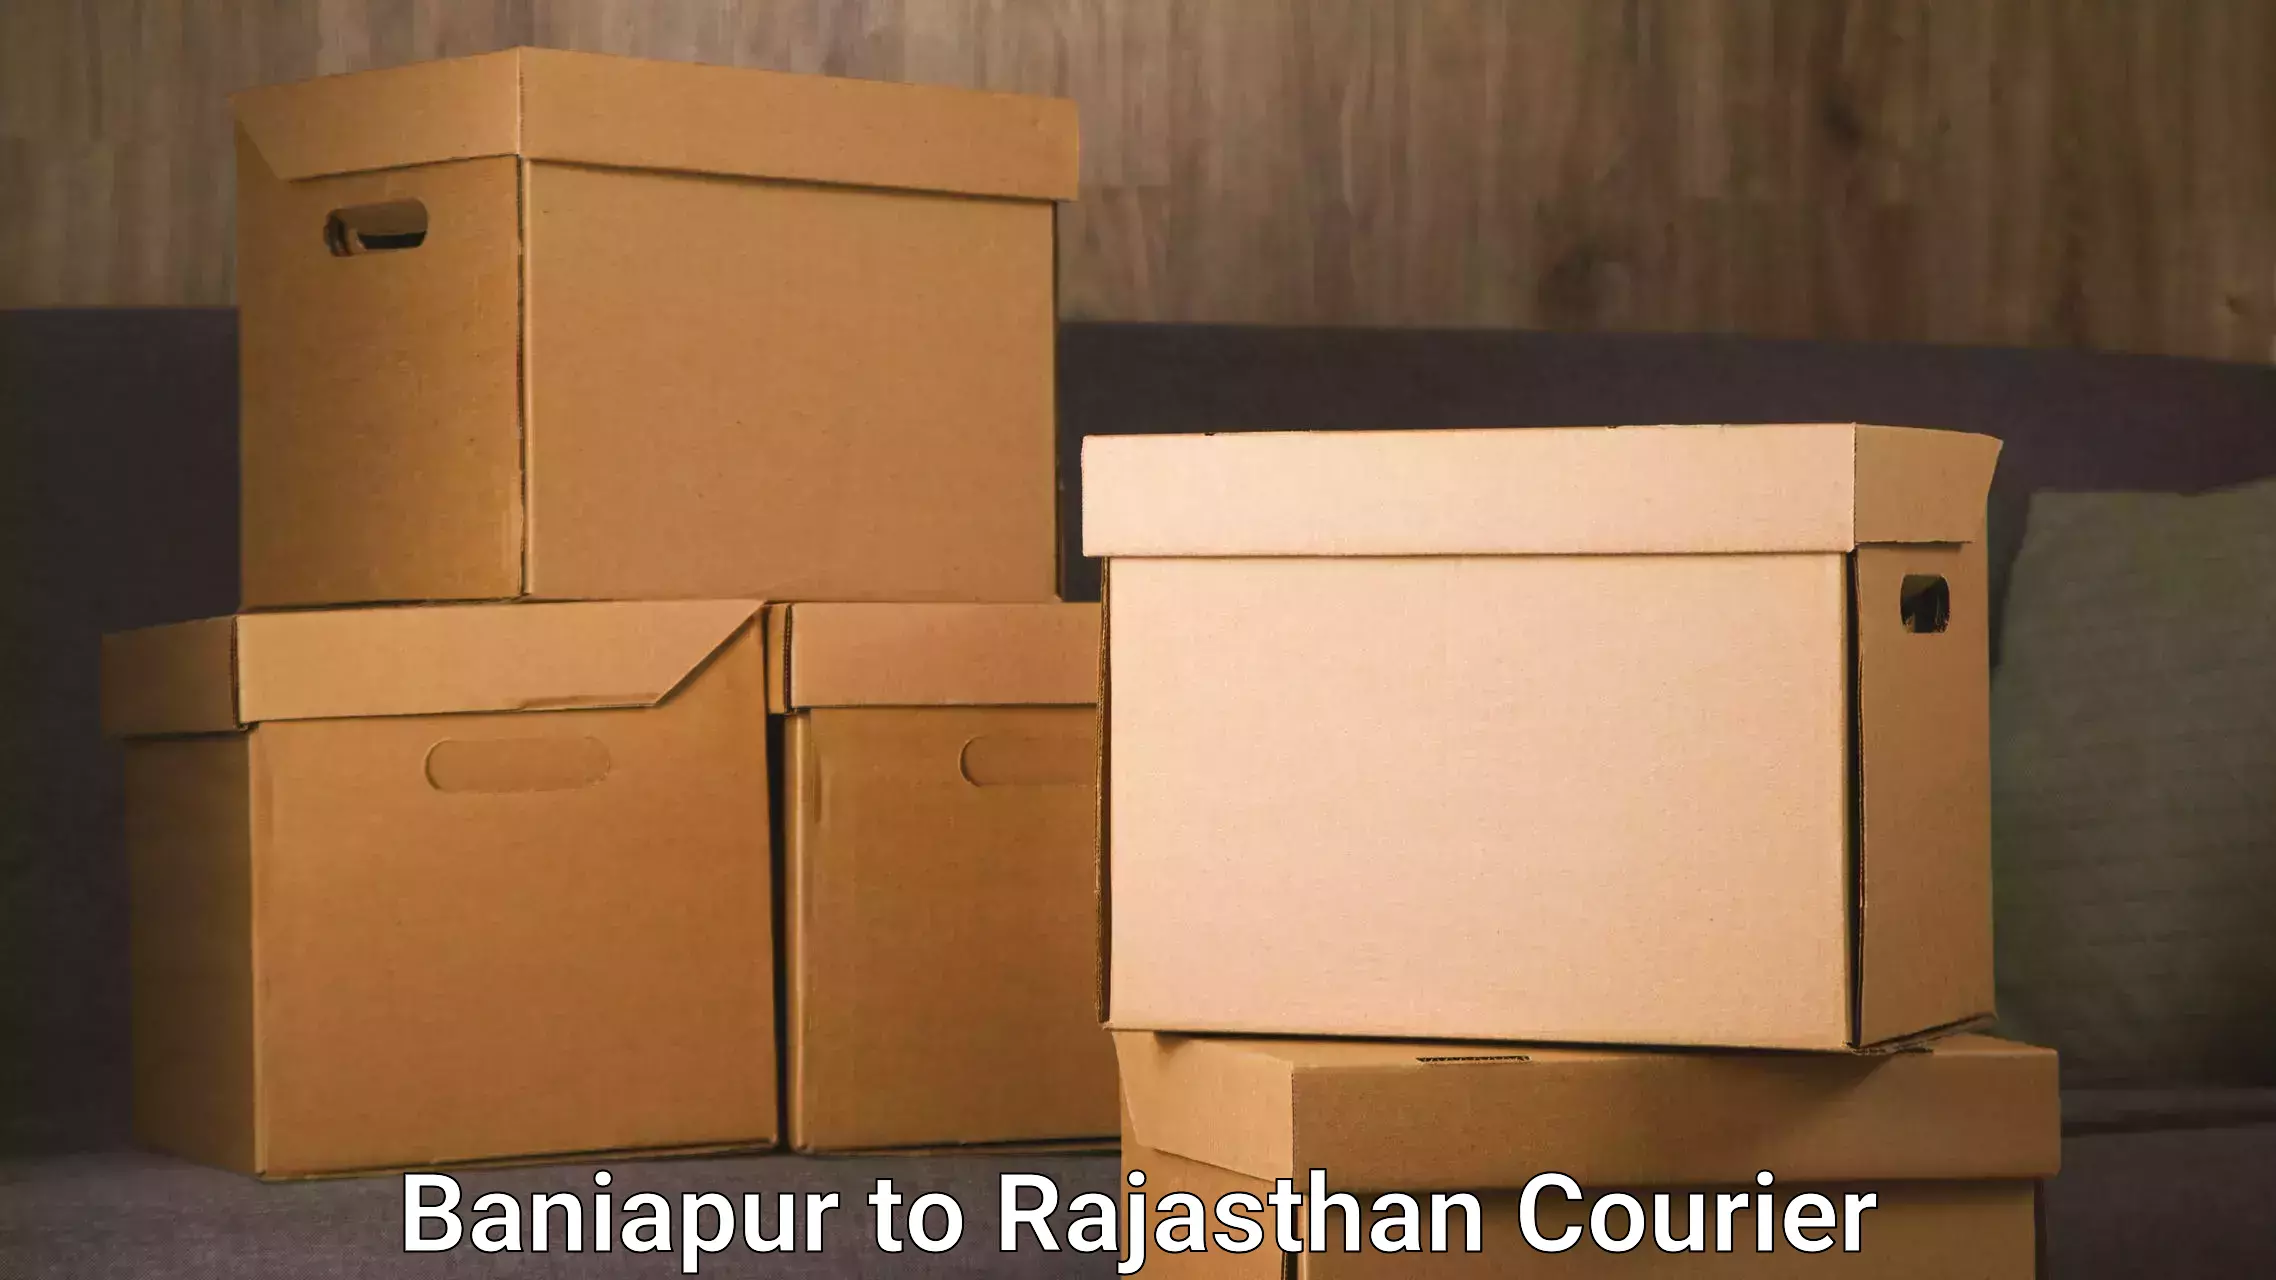 Furniture moving specialists Baniapur to Pokhran